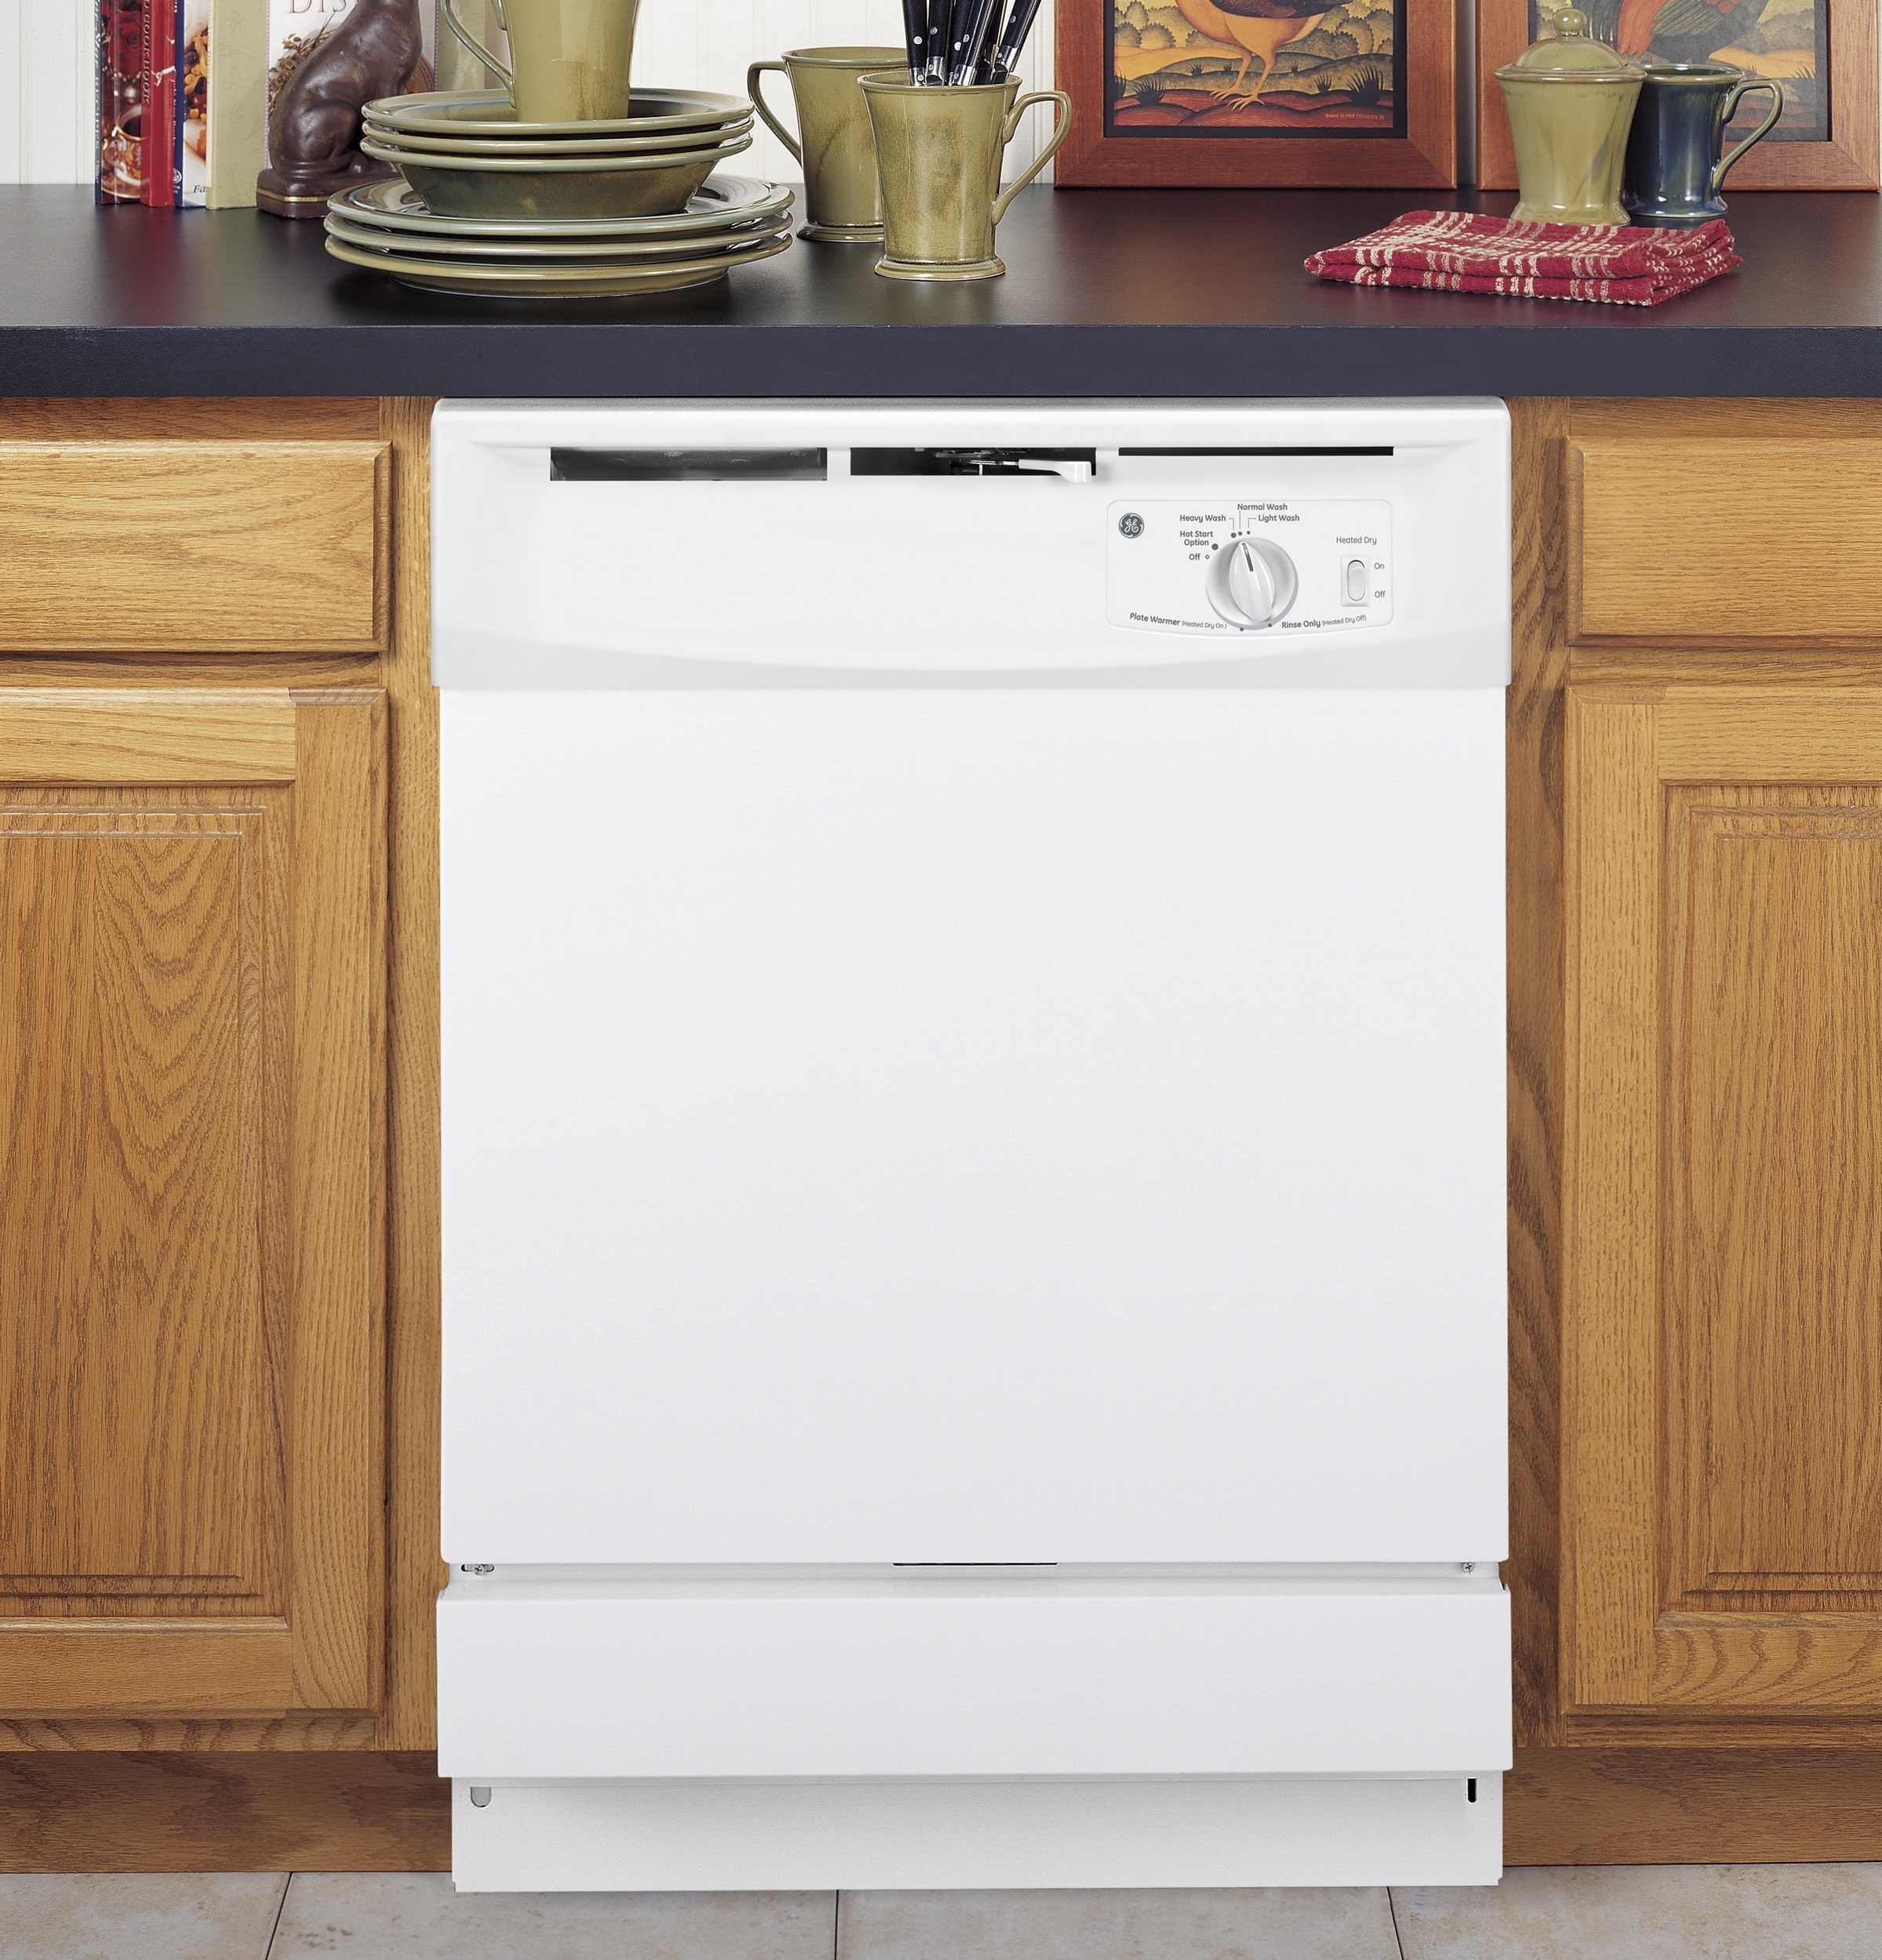 GDF570SGJWW GE GE® Stainless Steel Interior Dishwasher with Front Controls  WHITE - Hahn Appliance Warehouse